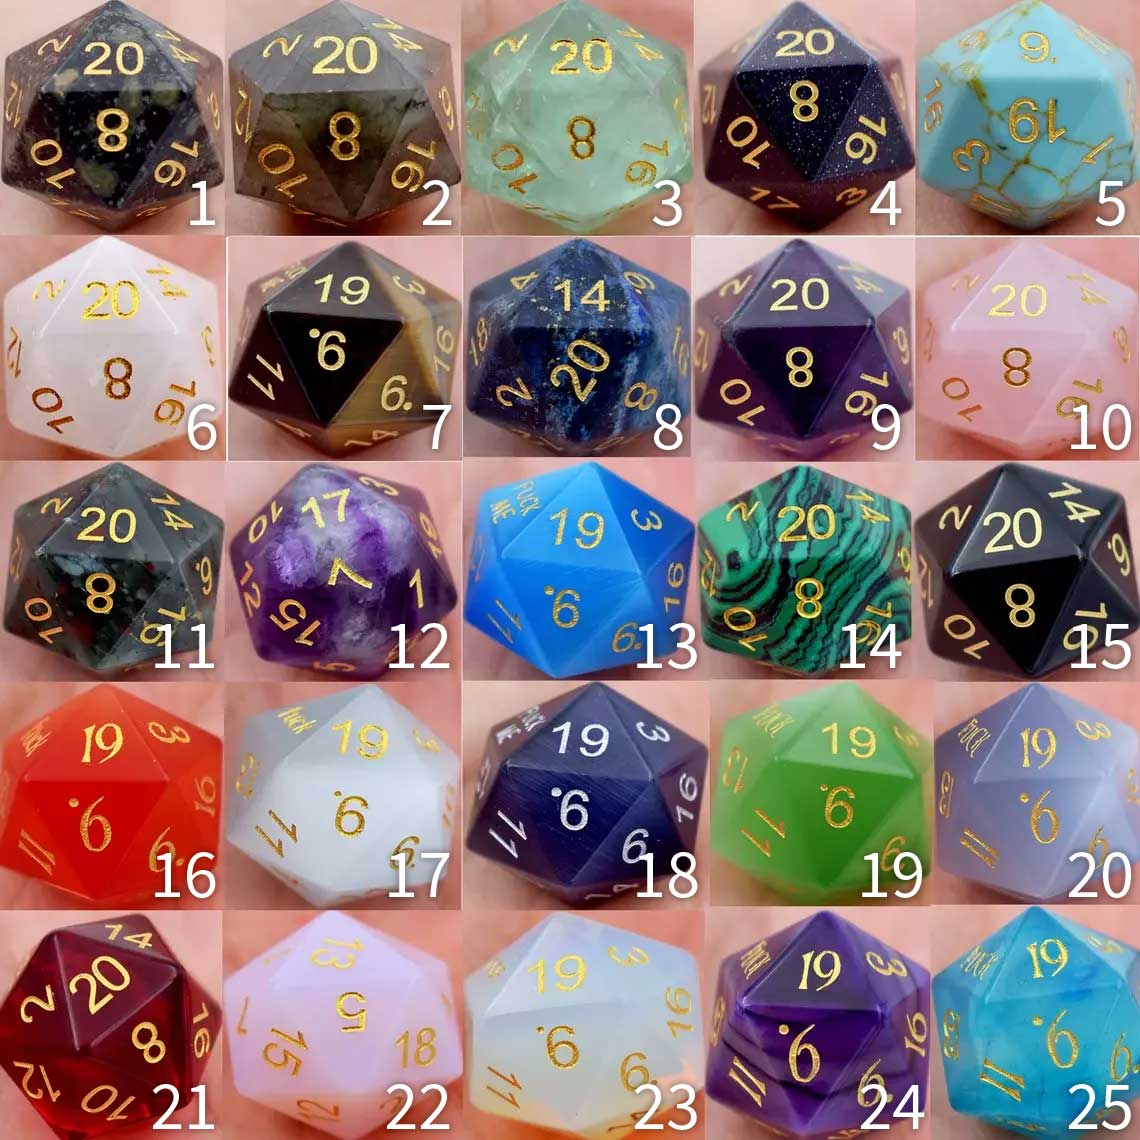 Custom D20 Dice: Create Your Own Personalized Dice!